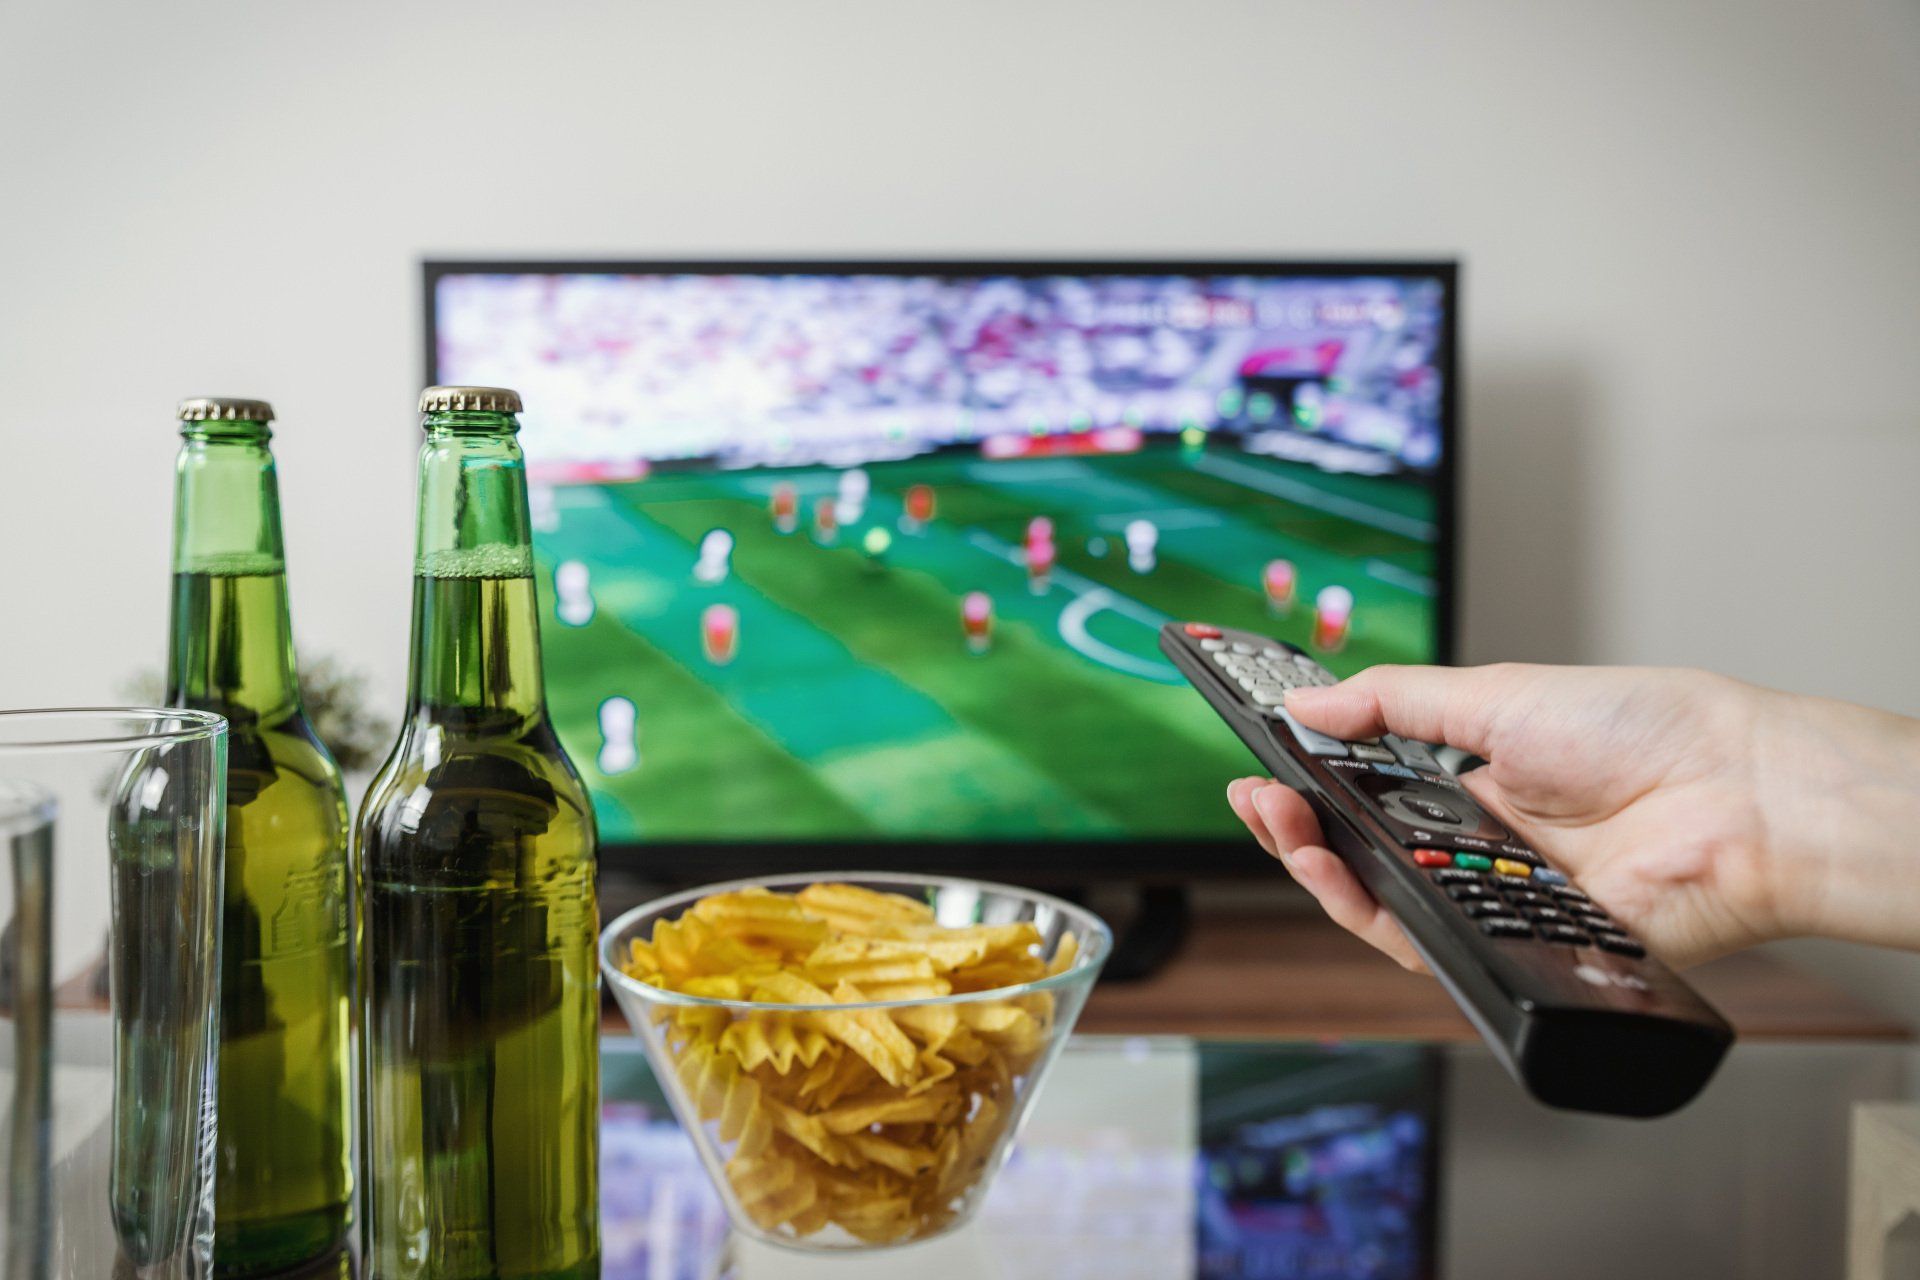 a person is holding a remote control in front of a television .